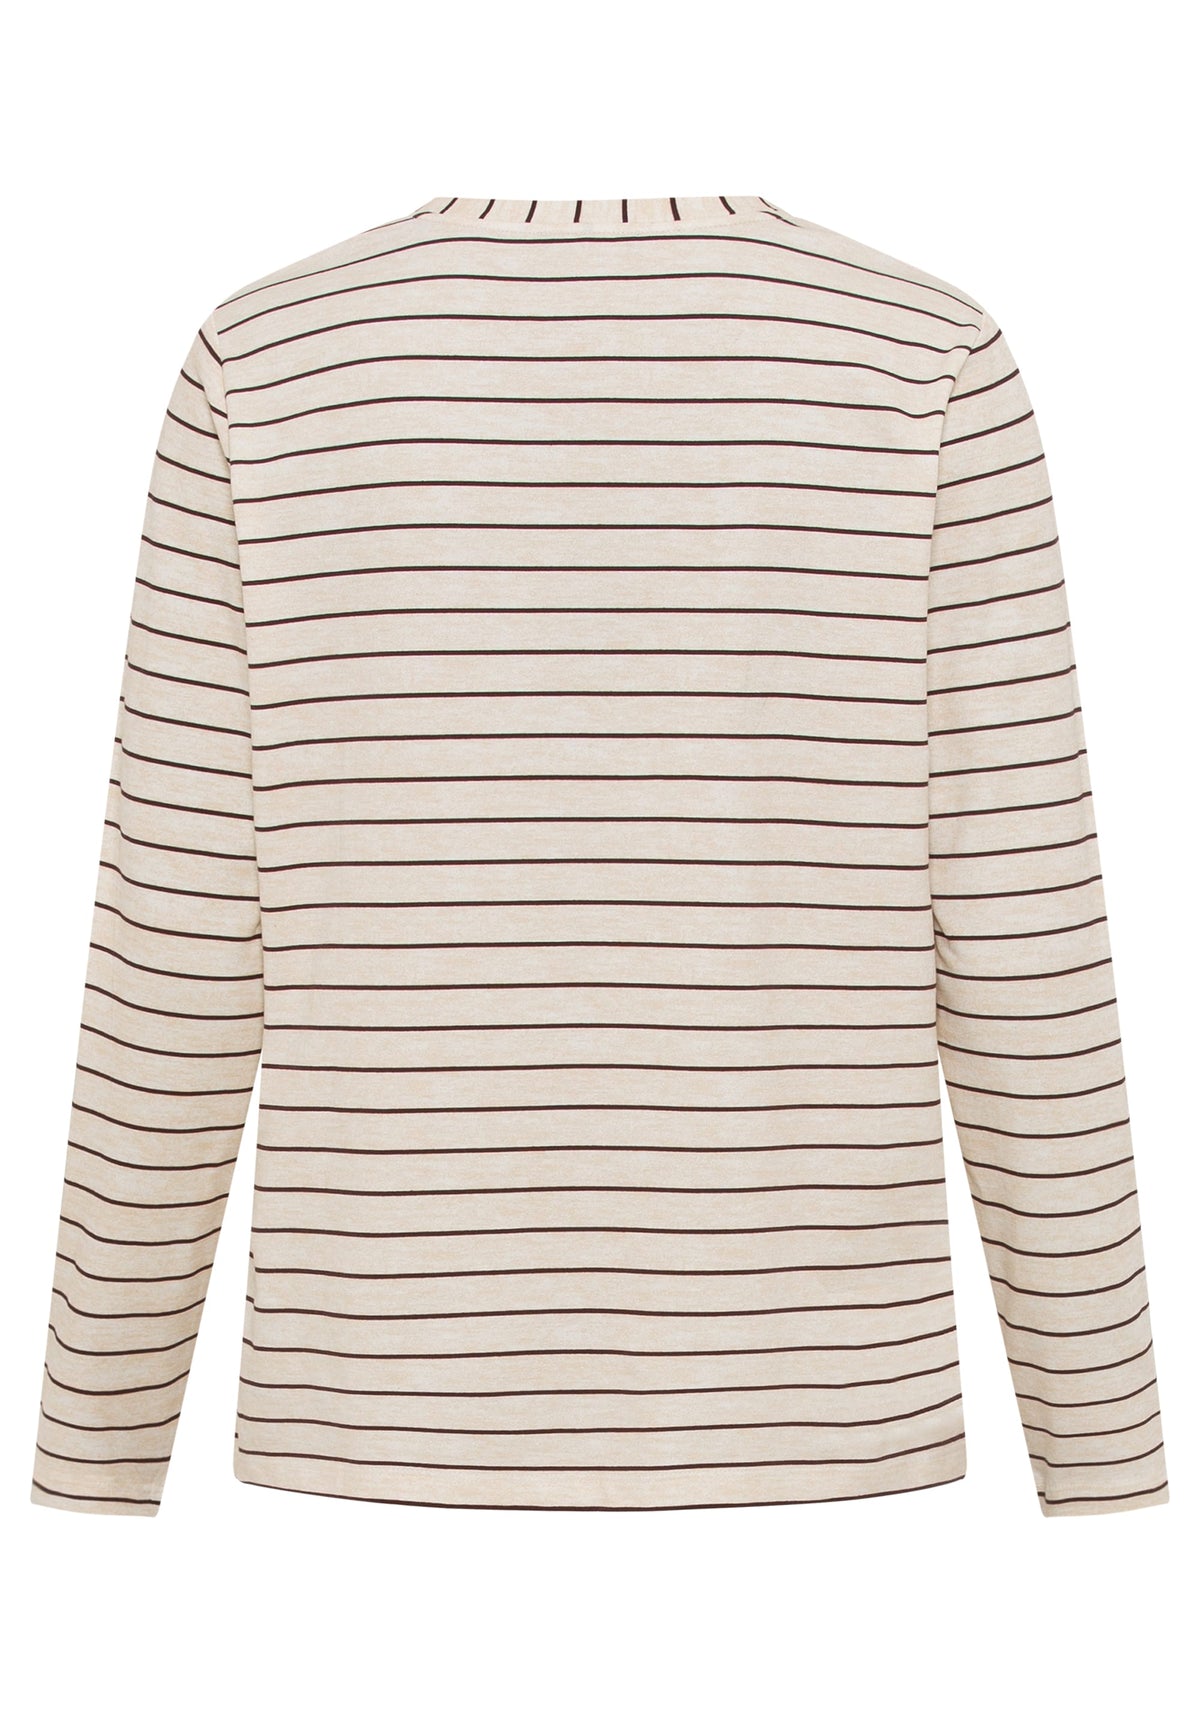 Cotton Blend Long Sleeve Stripe and Placement Print T-Shirt